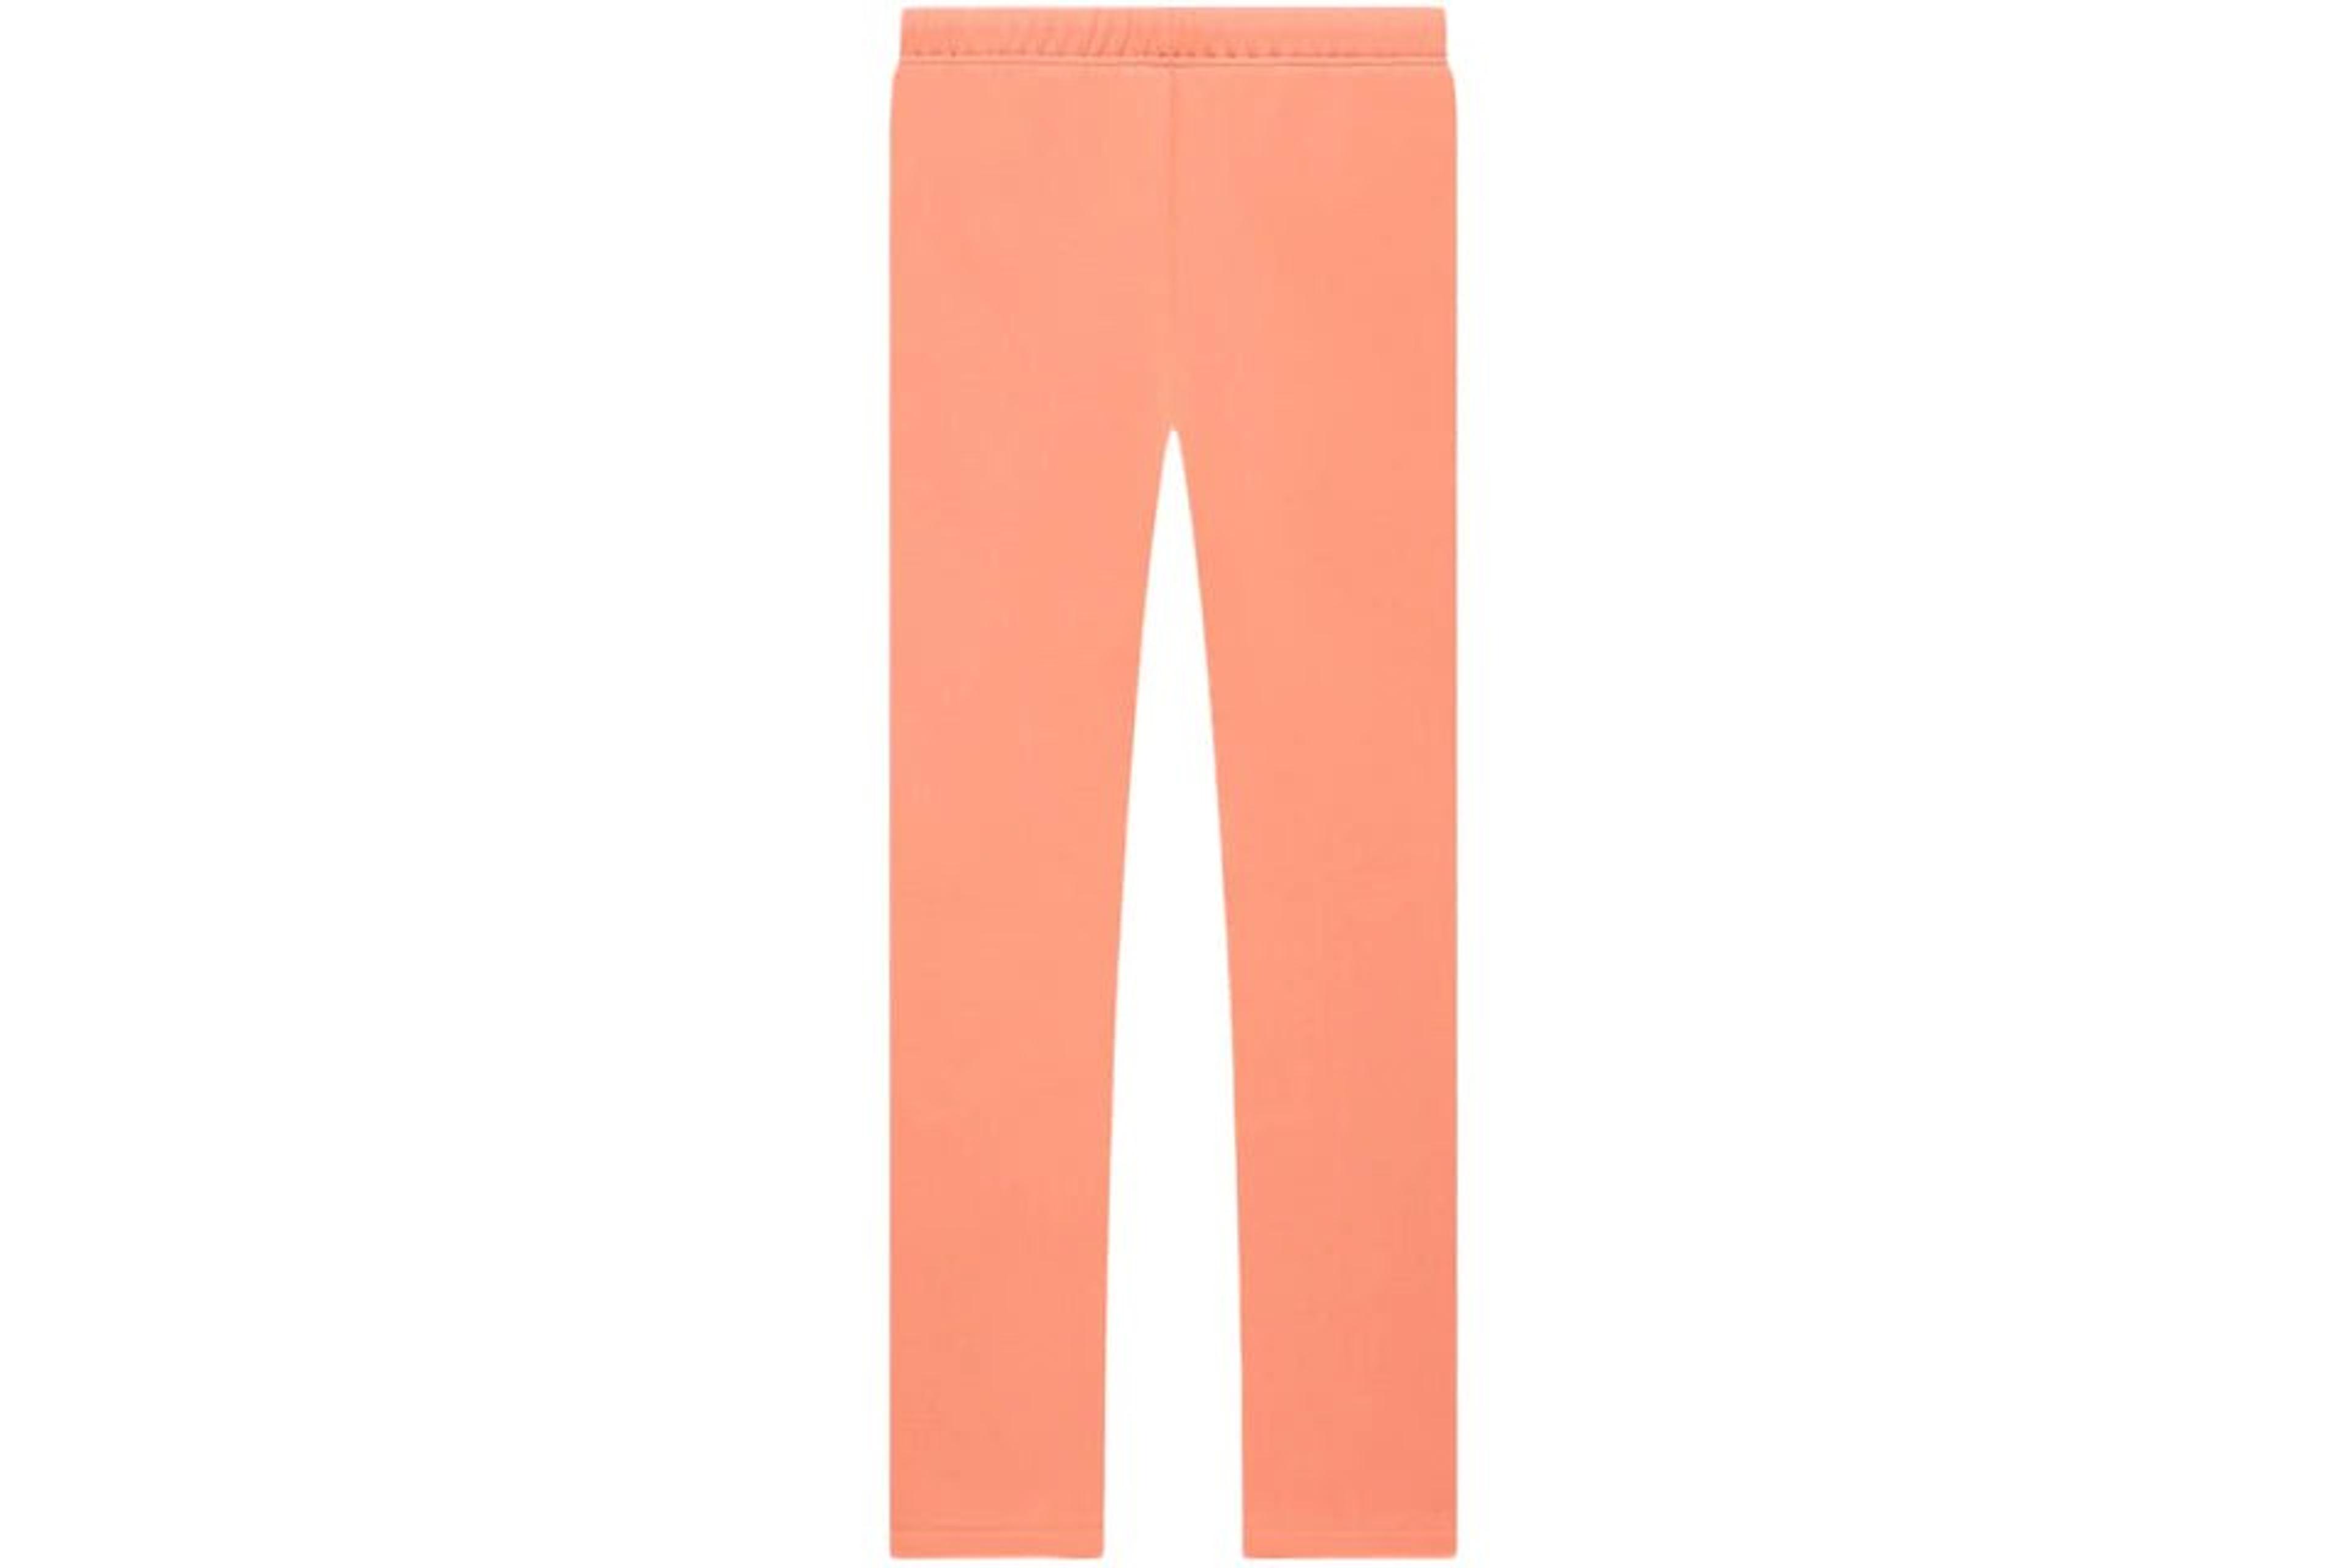 Alternate View 1 of Fear of God Essentials Relaxed Sweatpant Coral